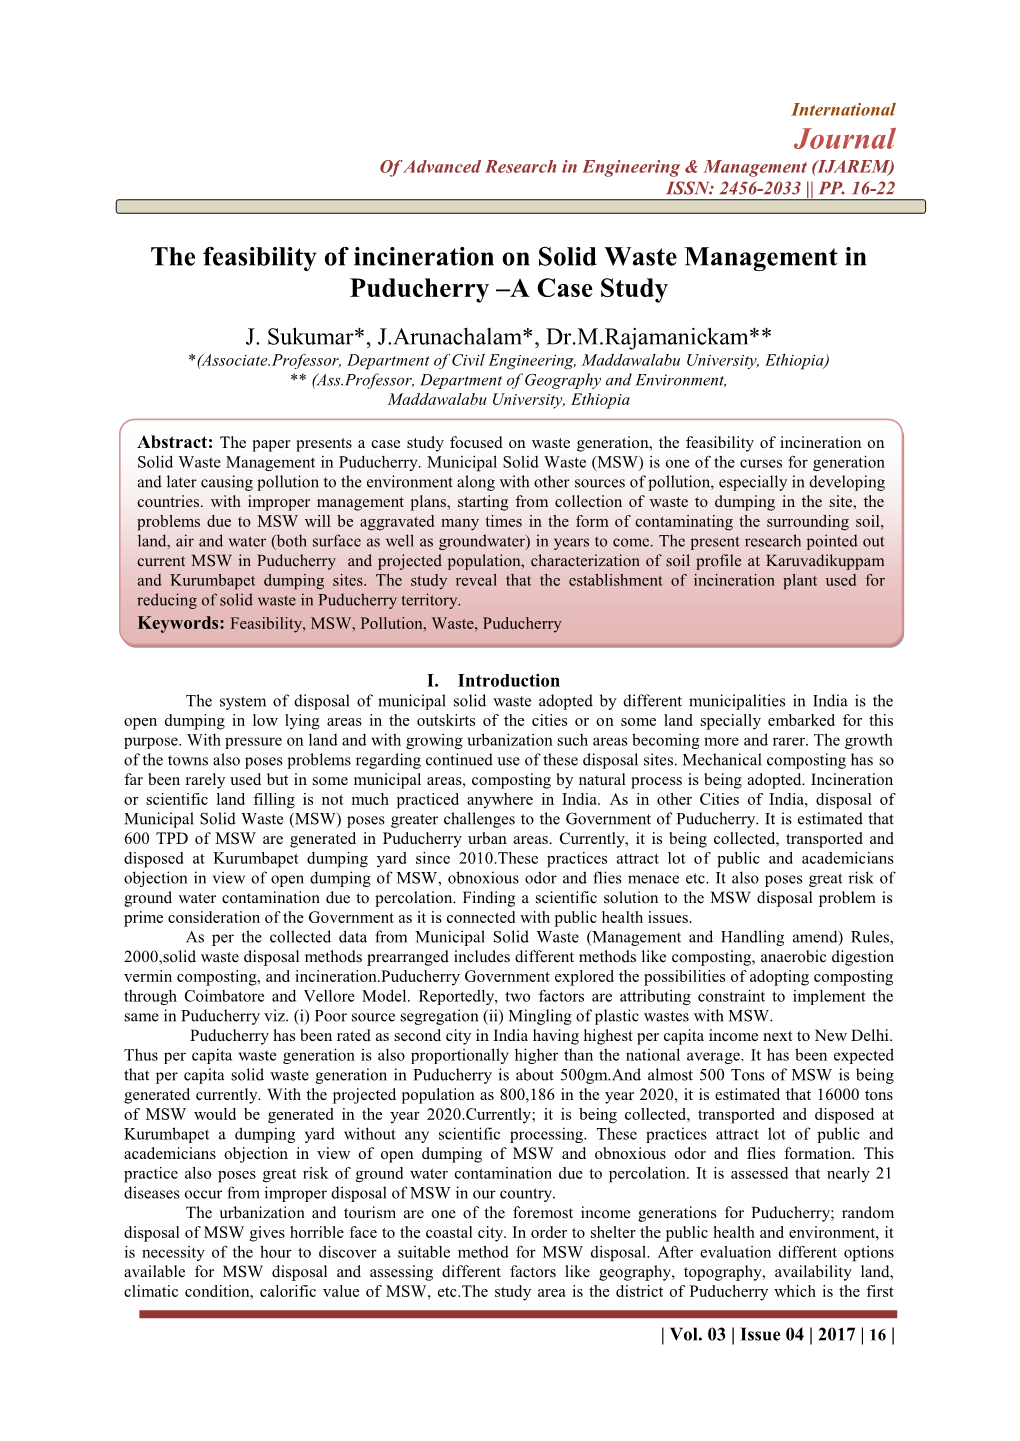 The Feasibility of Incineration on Solid Waste Management in Puducherry –A Case Study